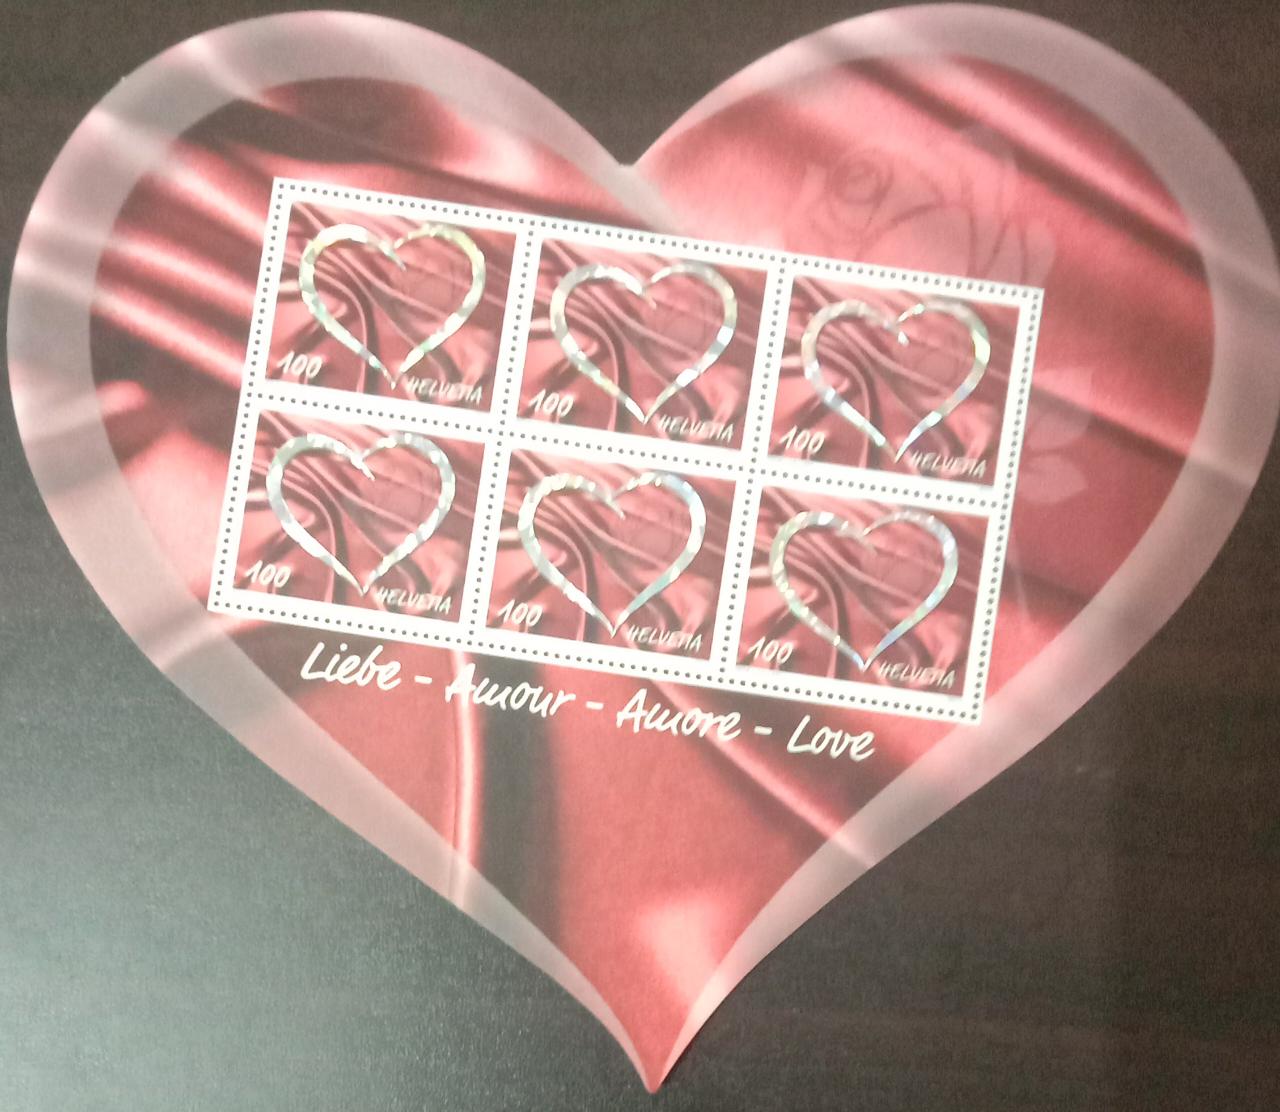 Swiss beautiful heart shaped ms with 6 stamps with holographic effects .